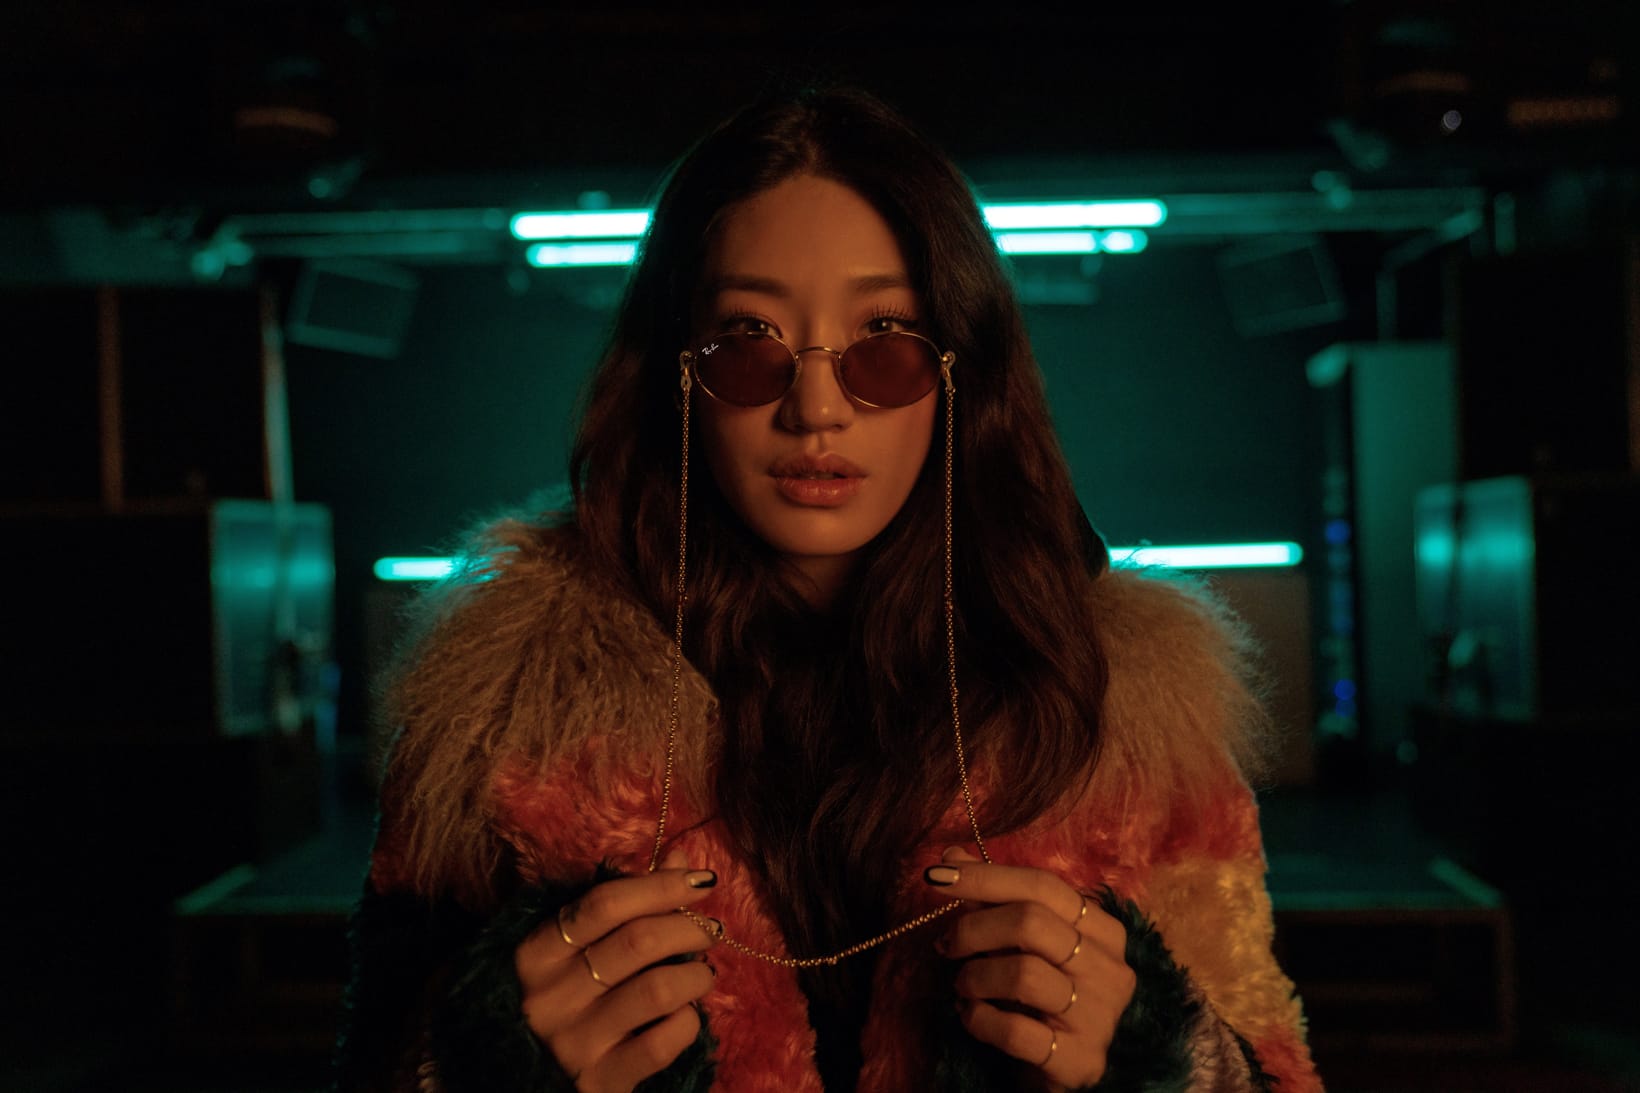 ray ban oval peggy gou